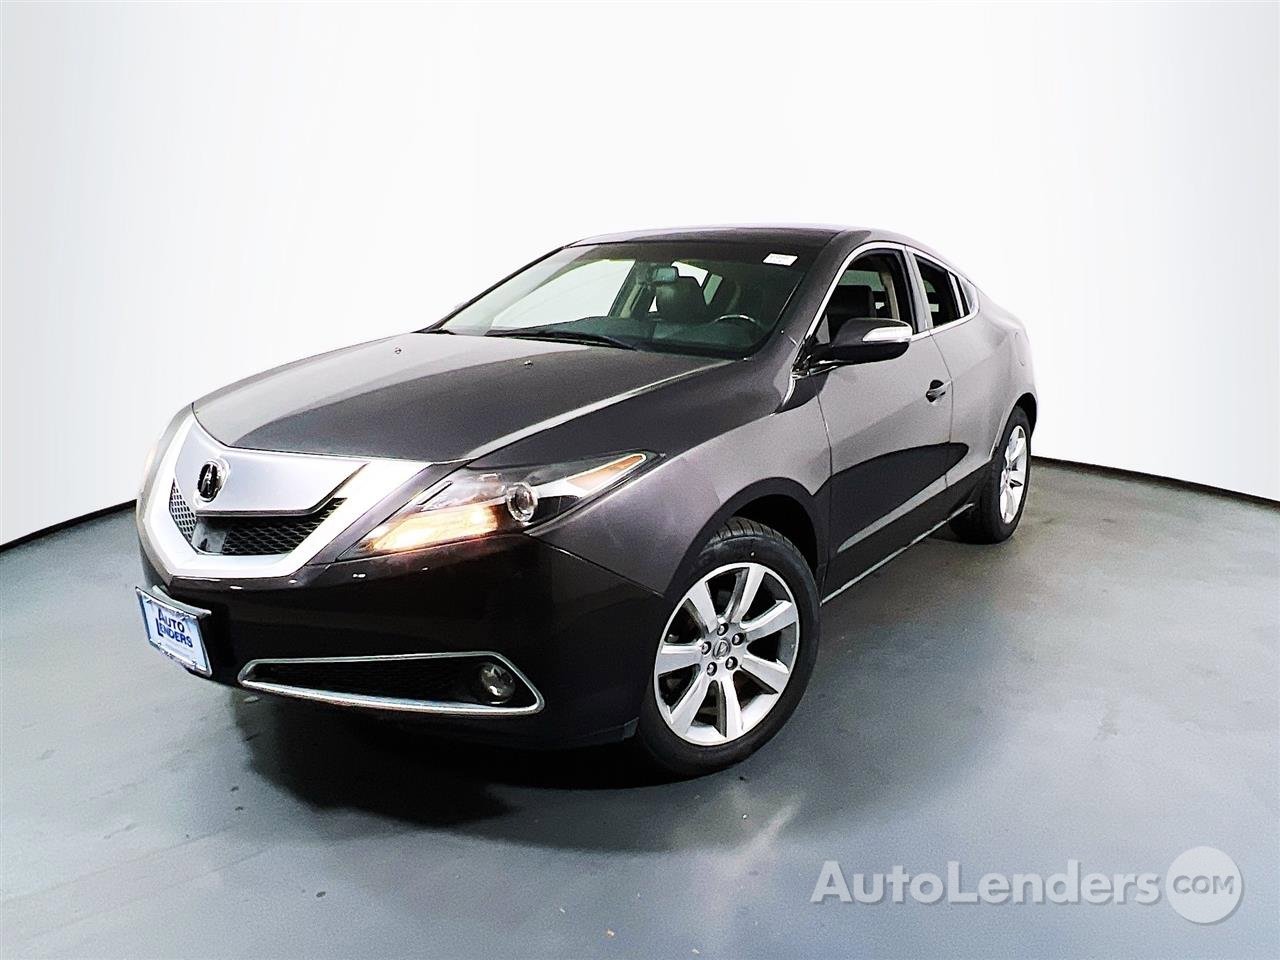 Used 2010 Acura ZDX for Sale Right Now - Autotrader